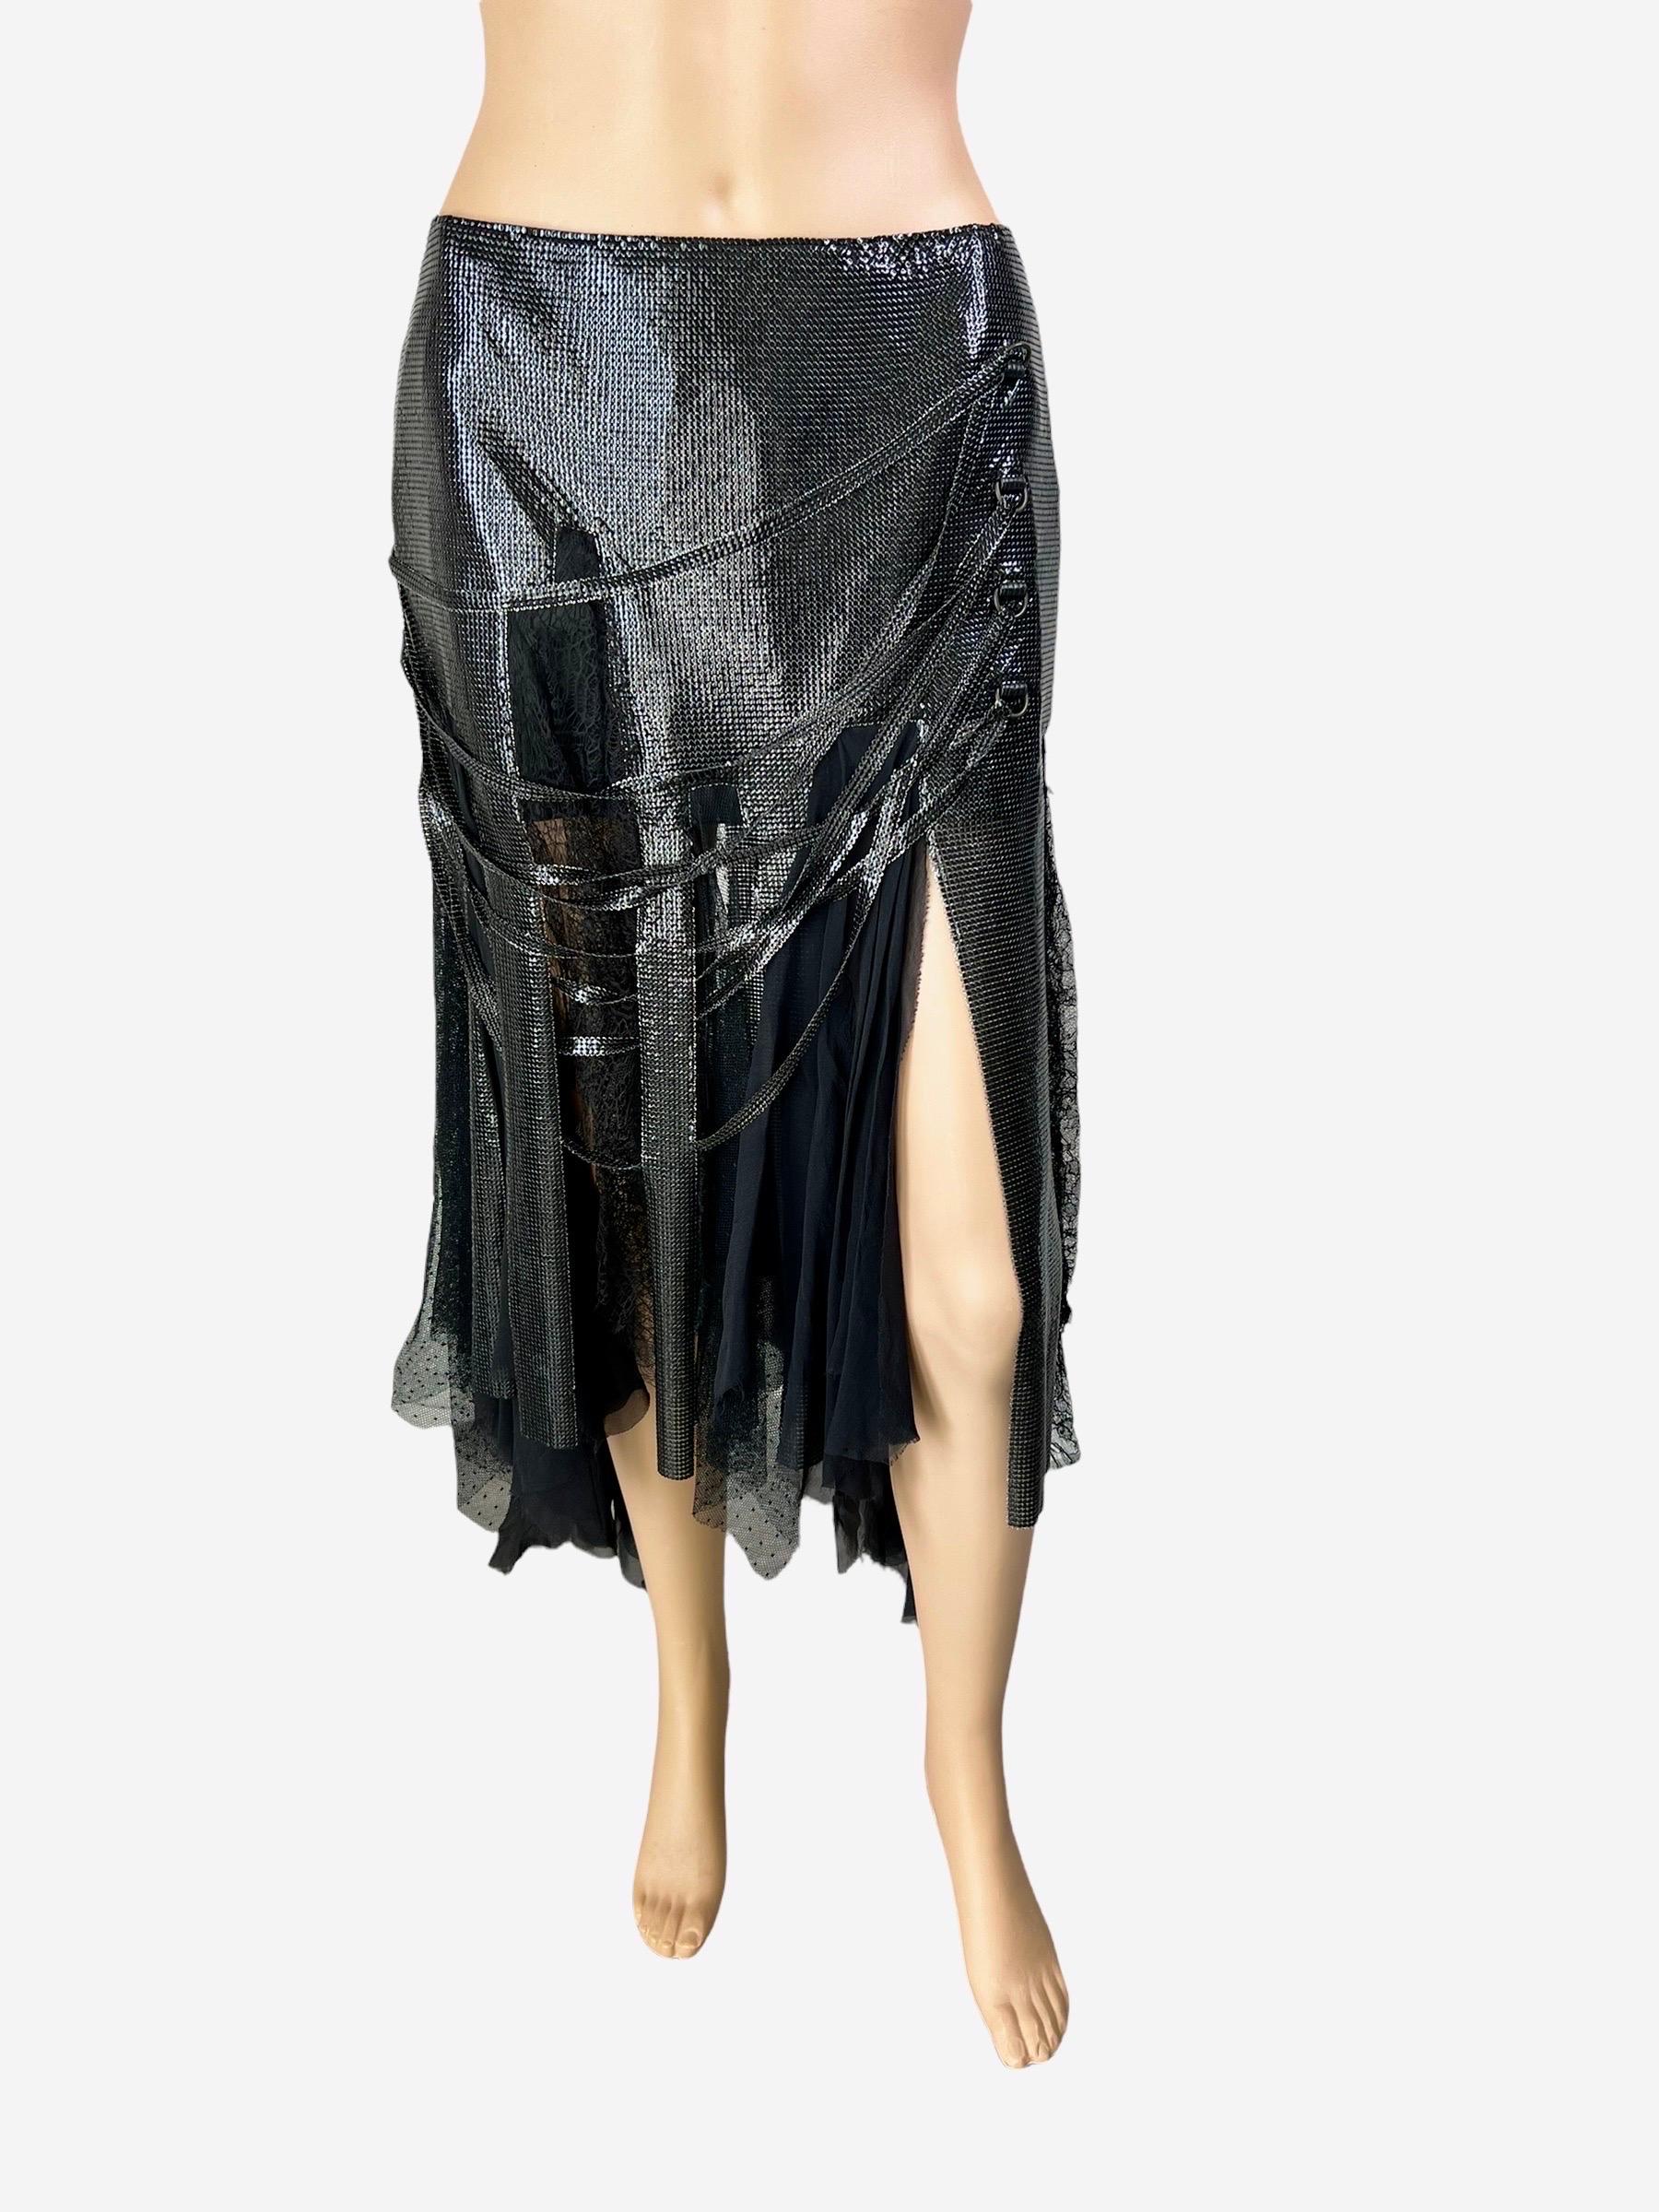 Versace F/W 2003 Runway Oroton Metal Mesh Chainmail Black Asymmetric Skirt Size IT 42

Black Versace Oroton asymmetric midi skirt with metal mesh paneling at hips, sheer and lace fringe panels at hem and concealed zip closure at back.

FOLLOW US ON